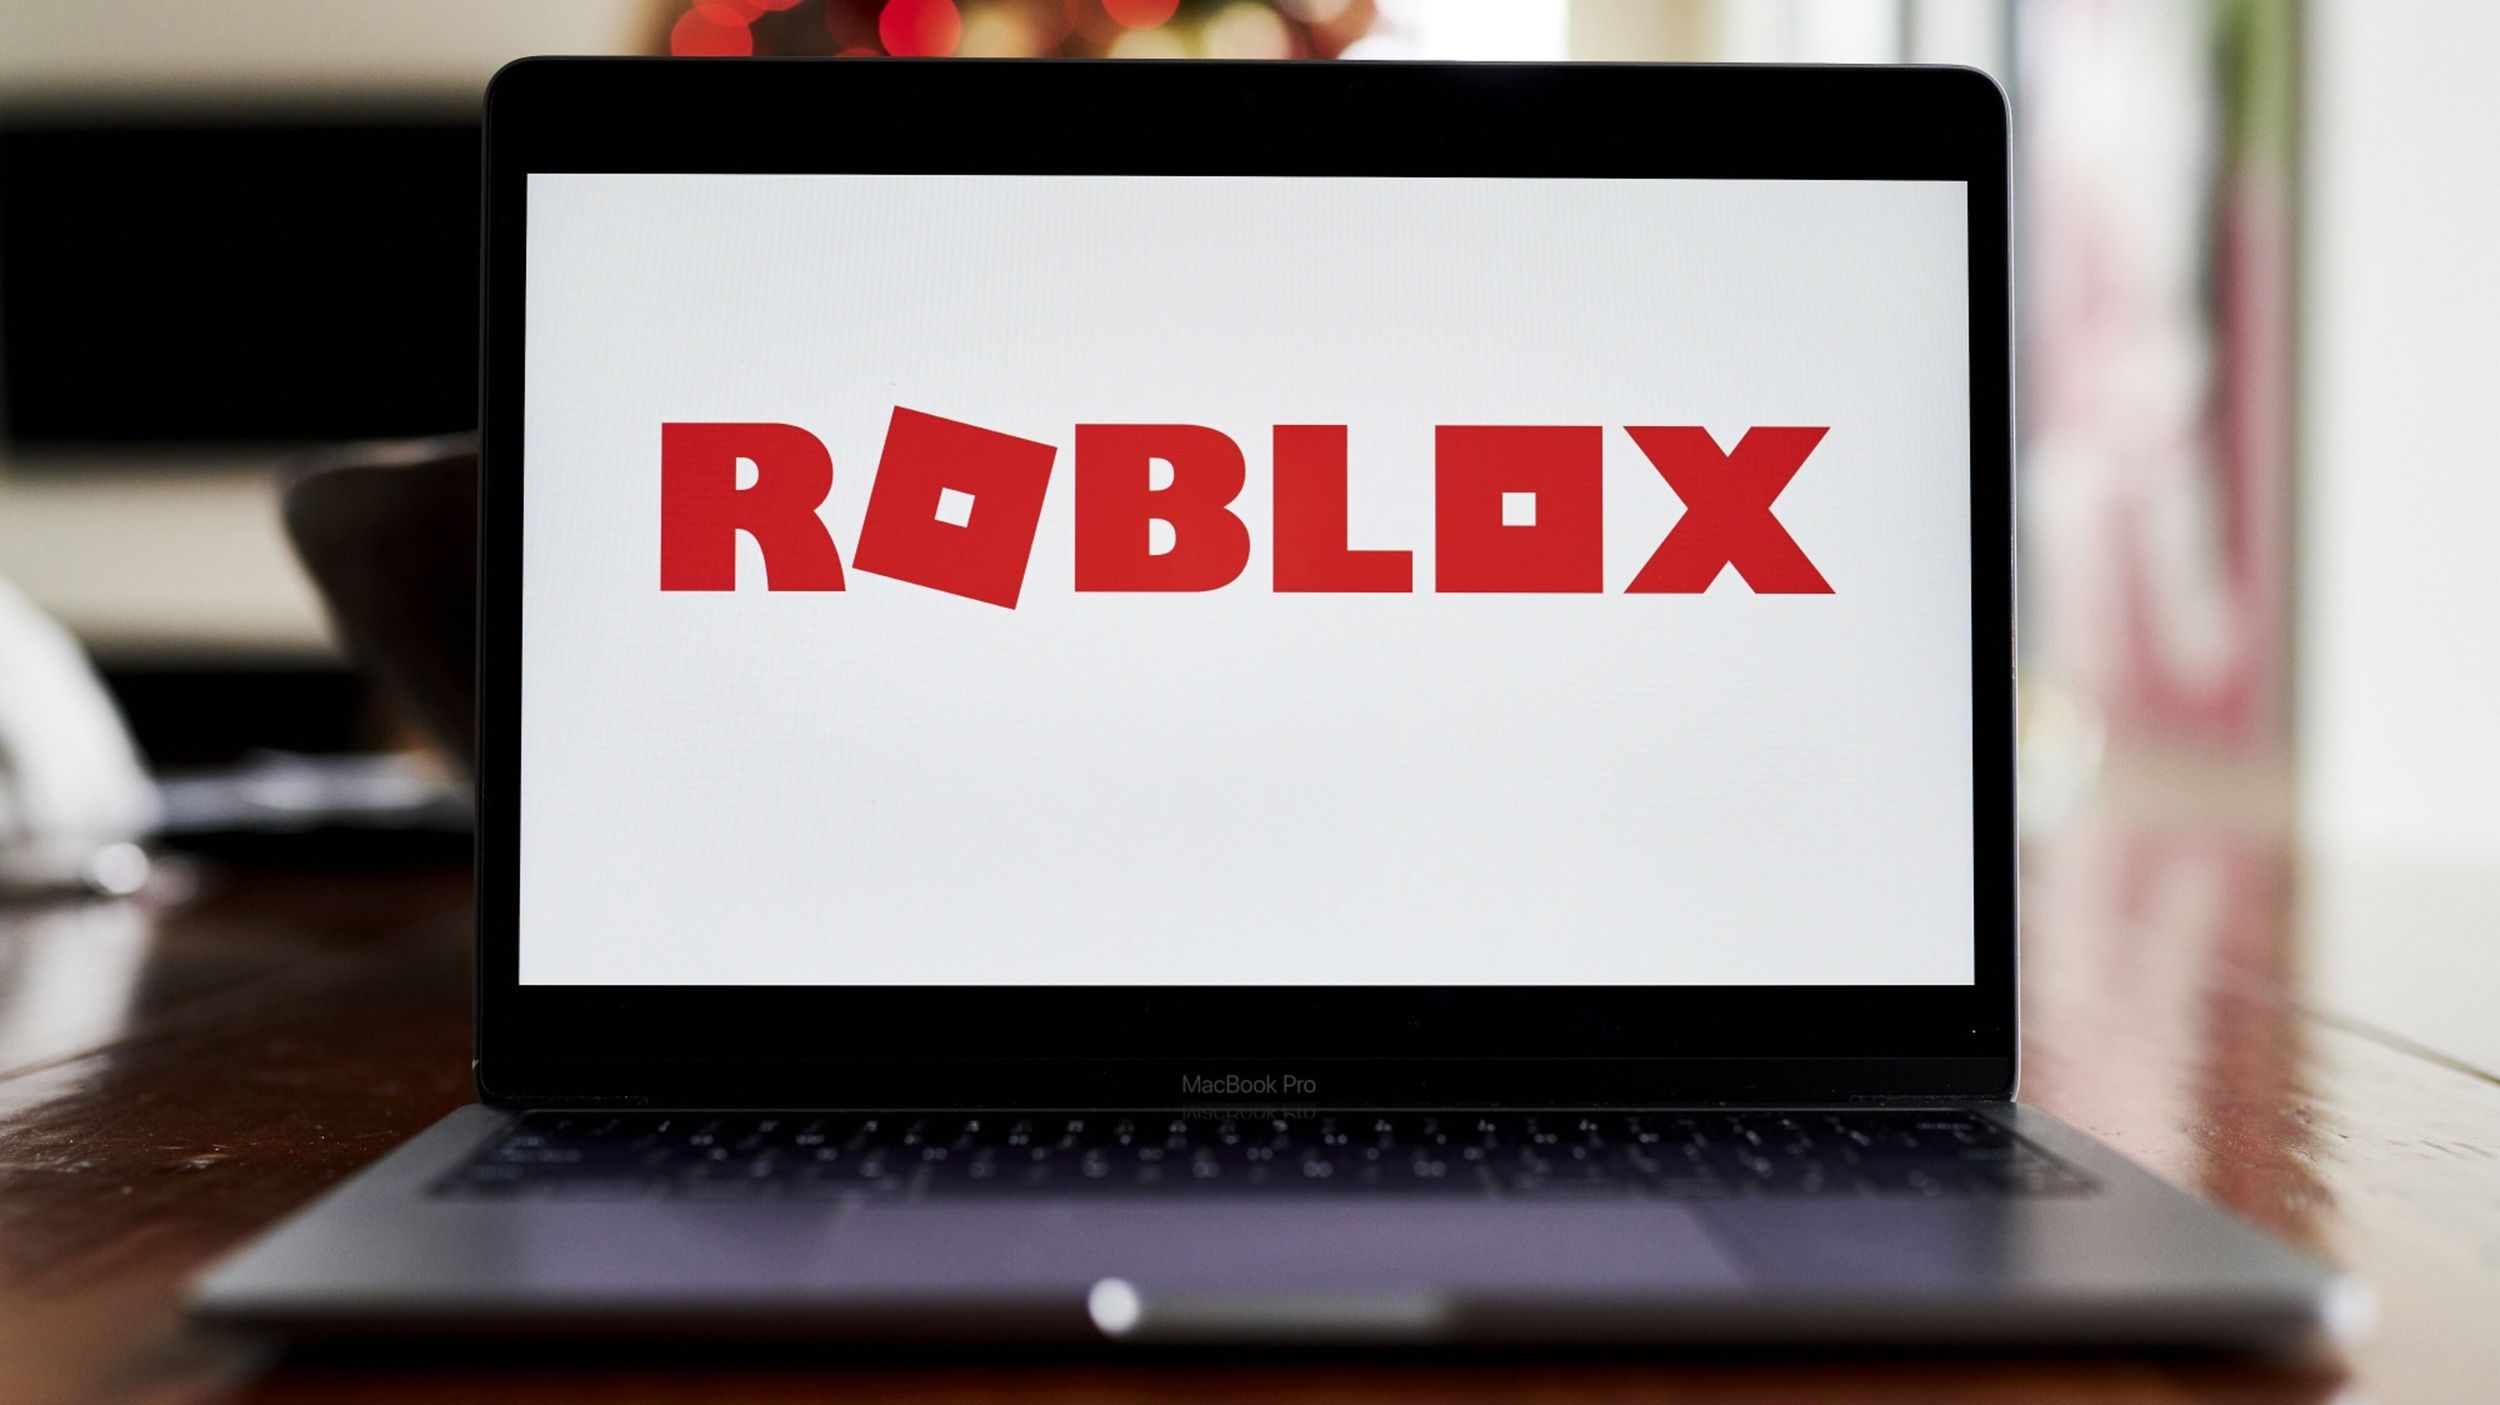 Roblox is better metaverse play than Facebook - Tao Value (NYSE